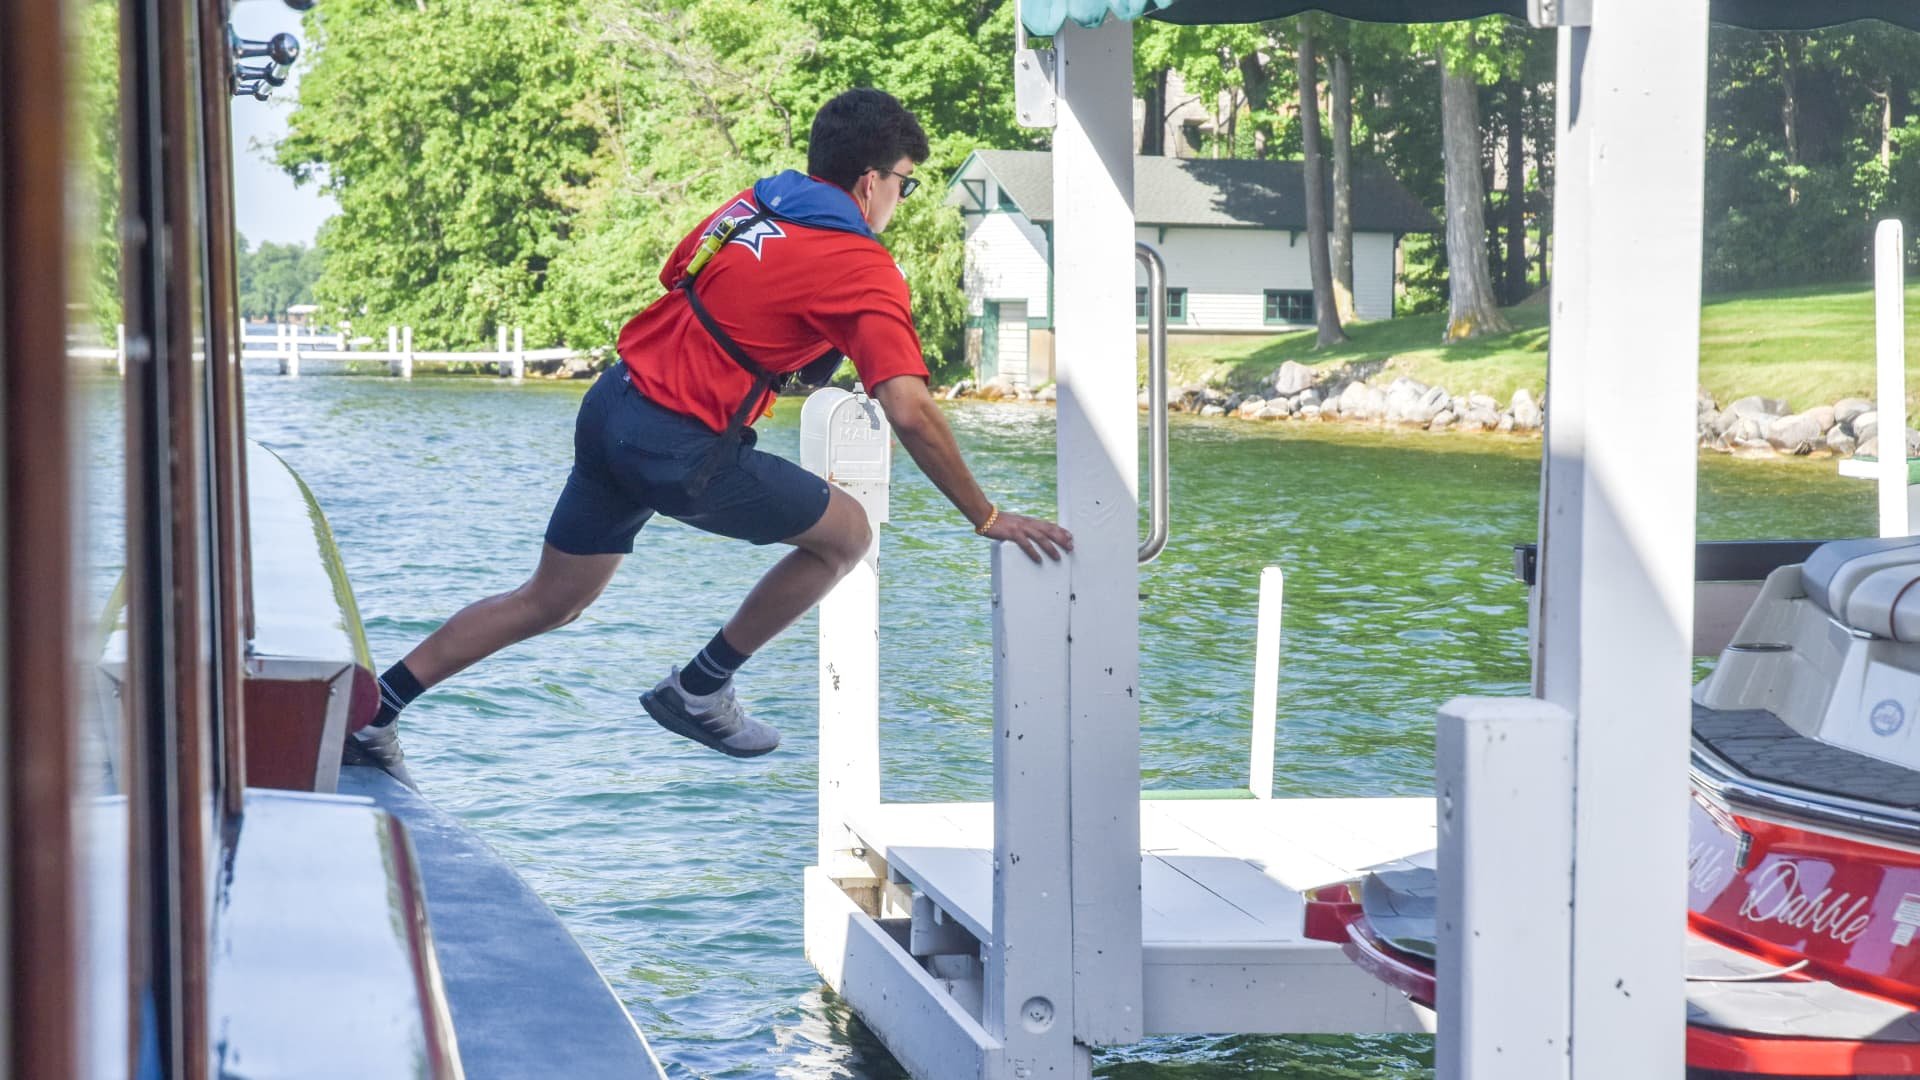 'The coolest summer job': These teens jump off a moving boat to deliver mail in Wisconsin